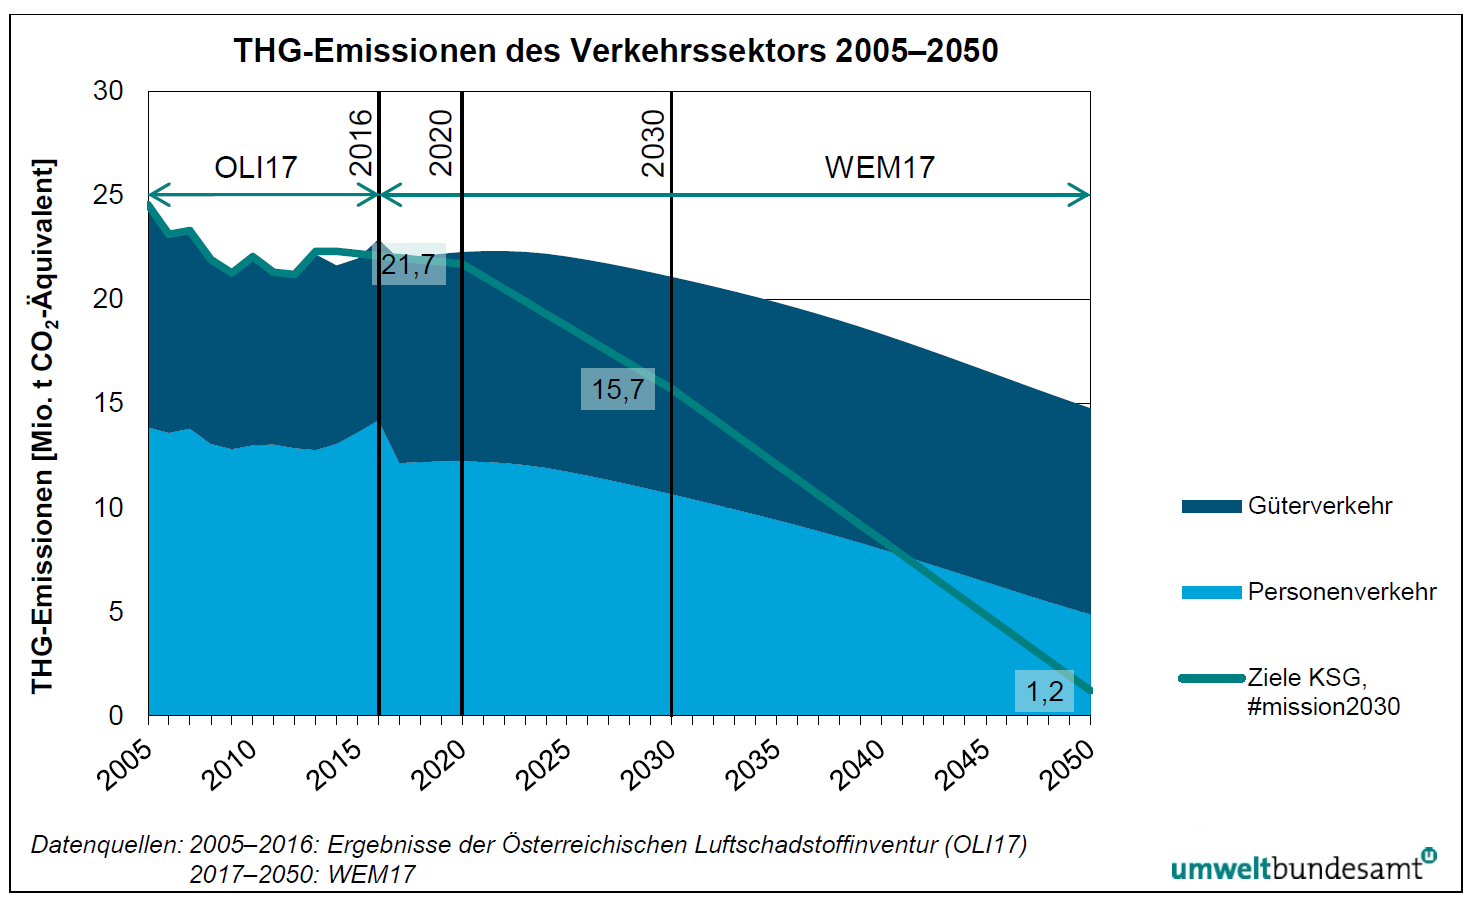 Chart Federal Environment Agency - GHG emissions from the transport sector, it is clear that the climate targets cannot be achieved through technological innovation alone